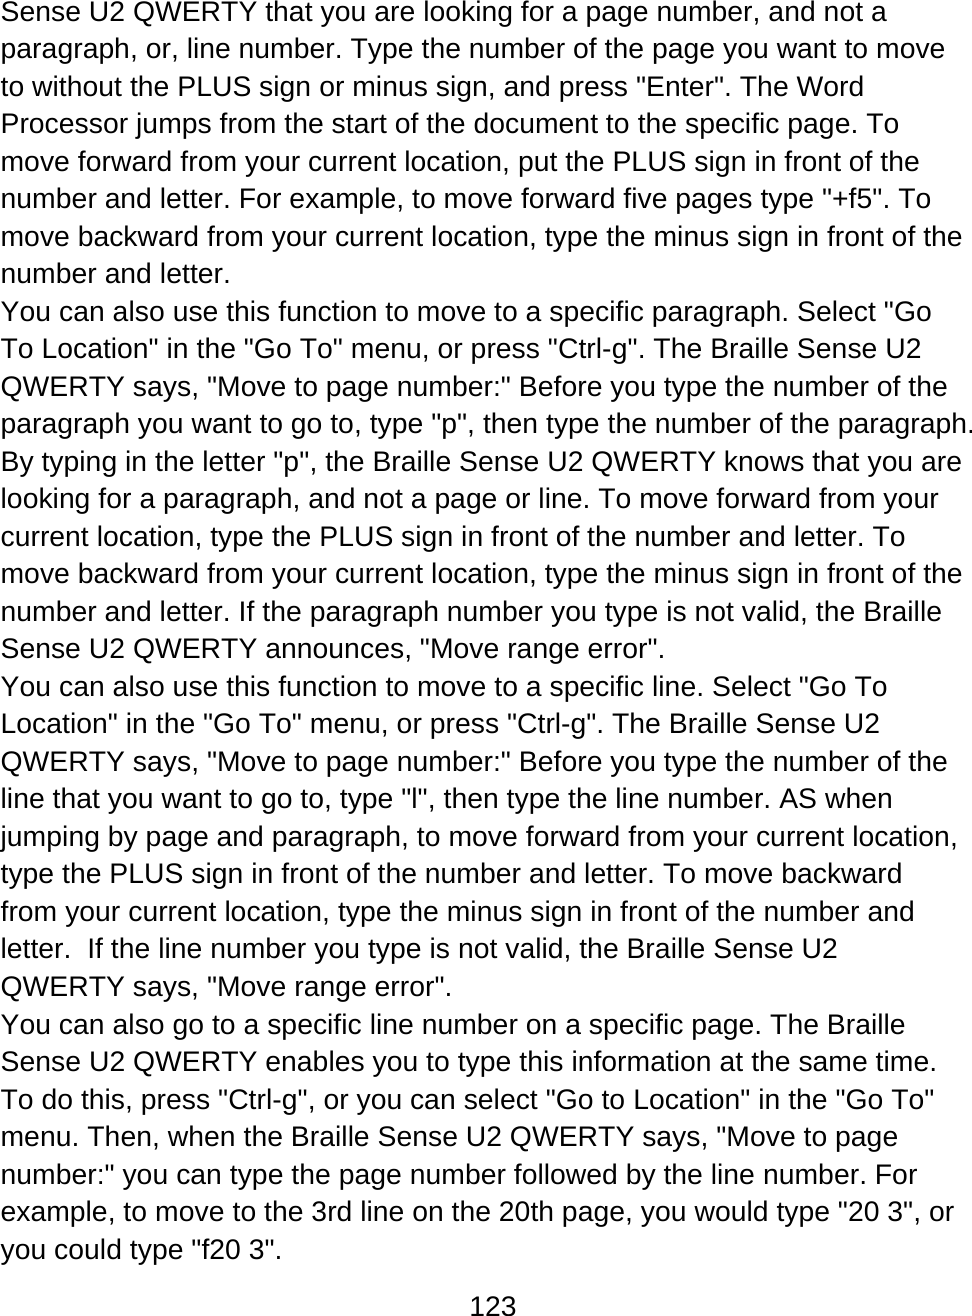 123  Sense U2 QWERTY that you are looking for a page number, and not a paragraph, or, line number. Type the number of the page you want to move to without the PLUS sign or minus sign, and press &quot;Enter&quot;. The Word Processor jumps from the start of the document to the specific page. To move forward from your current location, put the PLUS sign in front of the number and letter. For example, to move forward five pages type &quot;+f5&quot;. To move backward from your current location, type the minus sign in front of the number and letter.  You can also use this function to move to a specific paragraph. Select &quot;Go To Location&quot; in the &quot;Go To&quot; menu, or press &quot;Ctrl-g&quot;. The Braille Sense U2 QWERTY says, &quot;Move to page number:&quot; Before you type the number of the paragraph you want to go to, type &quot;p&quot;, then type the number of the paragraph. By typing in the letter &quot;p&quot;, the Braille Sense U2 QWERTY knows that you are looking for a paragraph, and not a page or line. To move forward from your current location, type the PLUS sign in front of the number and letter. To move backward from your current location, type the minus sign in front of the number and letter. If the paragraph number you type is not valid, the Braille Sense U2 QWERTY announces, &quot;Move range error&quot;. You can also use this function to move to a specific line. Select &quot;Go To Location&quot; in the &quot;Go To&quot; menu, or press &quot;Ctrl-g&quot;. The Braille Sense U2 QWERTY says, &quot;Move to page number:&quot; Before you type the number of the line that you want to go to, type &quot;l&quot;, then type the line number. AS when jumping by page and paragraph, to move forward from your current location, type the PLUS sign in front of the number and letter. To move backward from your current location, type the minus sign in front of the number and letter.  If the line number you type is not valid, the Braille Sense U2 QWERTY says, &quot;Move range error&quot;. You can also go to a specific line number on a specific page. The Braille Sense U2 QWERTY enables you to type this information at the same time. To do this, press &quot;Ctrl-g&quot;, or you can select &quot;Go to Location&quot; in the &quot;Go To&quot; menu. Then, when the Braille Sense U2 QWERTY says, &quot;Move to page number:&quot; you can type the page number followed by the line number. For example, to move to the 3rd line on the 20th page, you would type &quot;20 3&quot;, or you could type &quot;f20 3&quot;.  